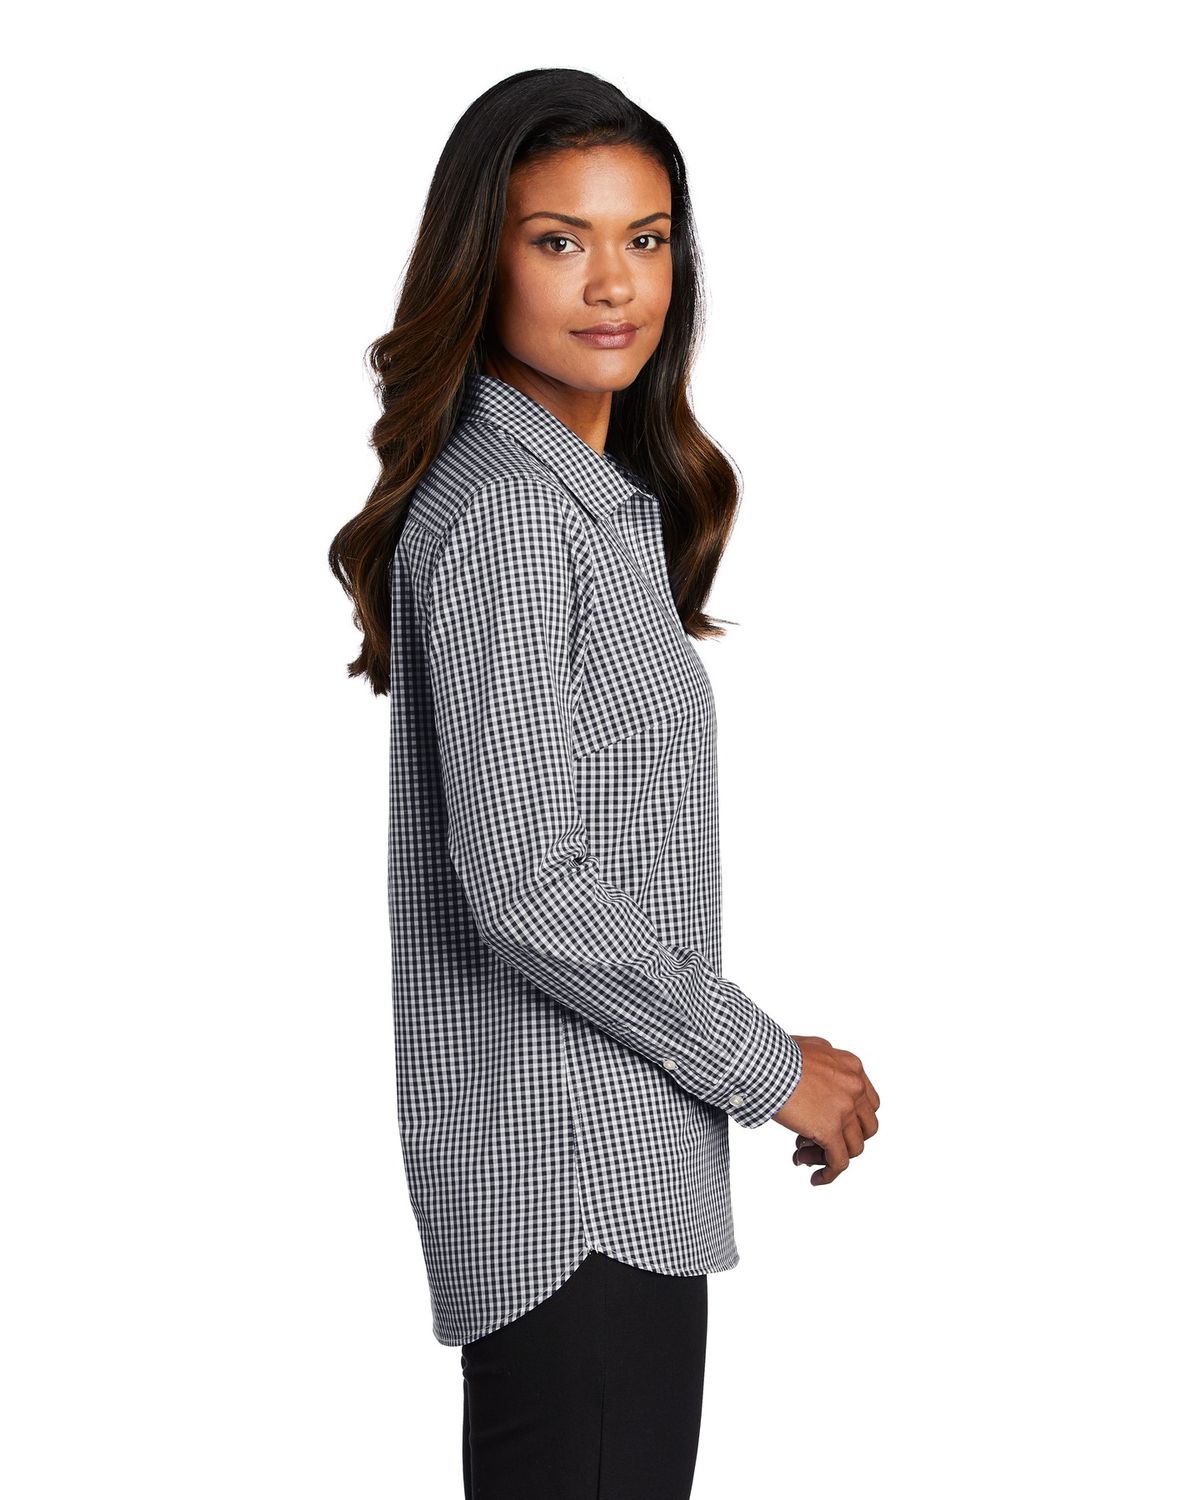 'Port Authority LW644 Ladies Broadcloth Gingham Easy Care Shirt'